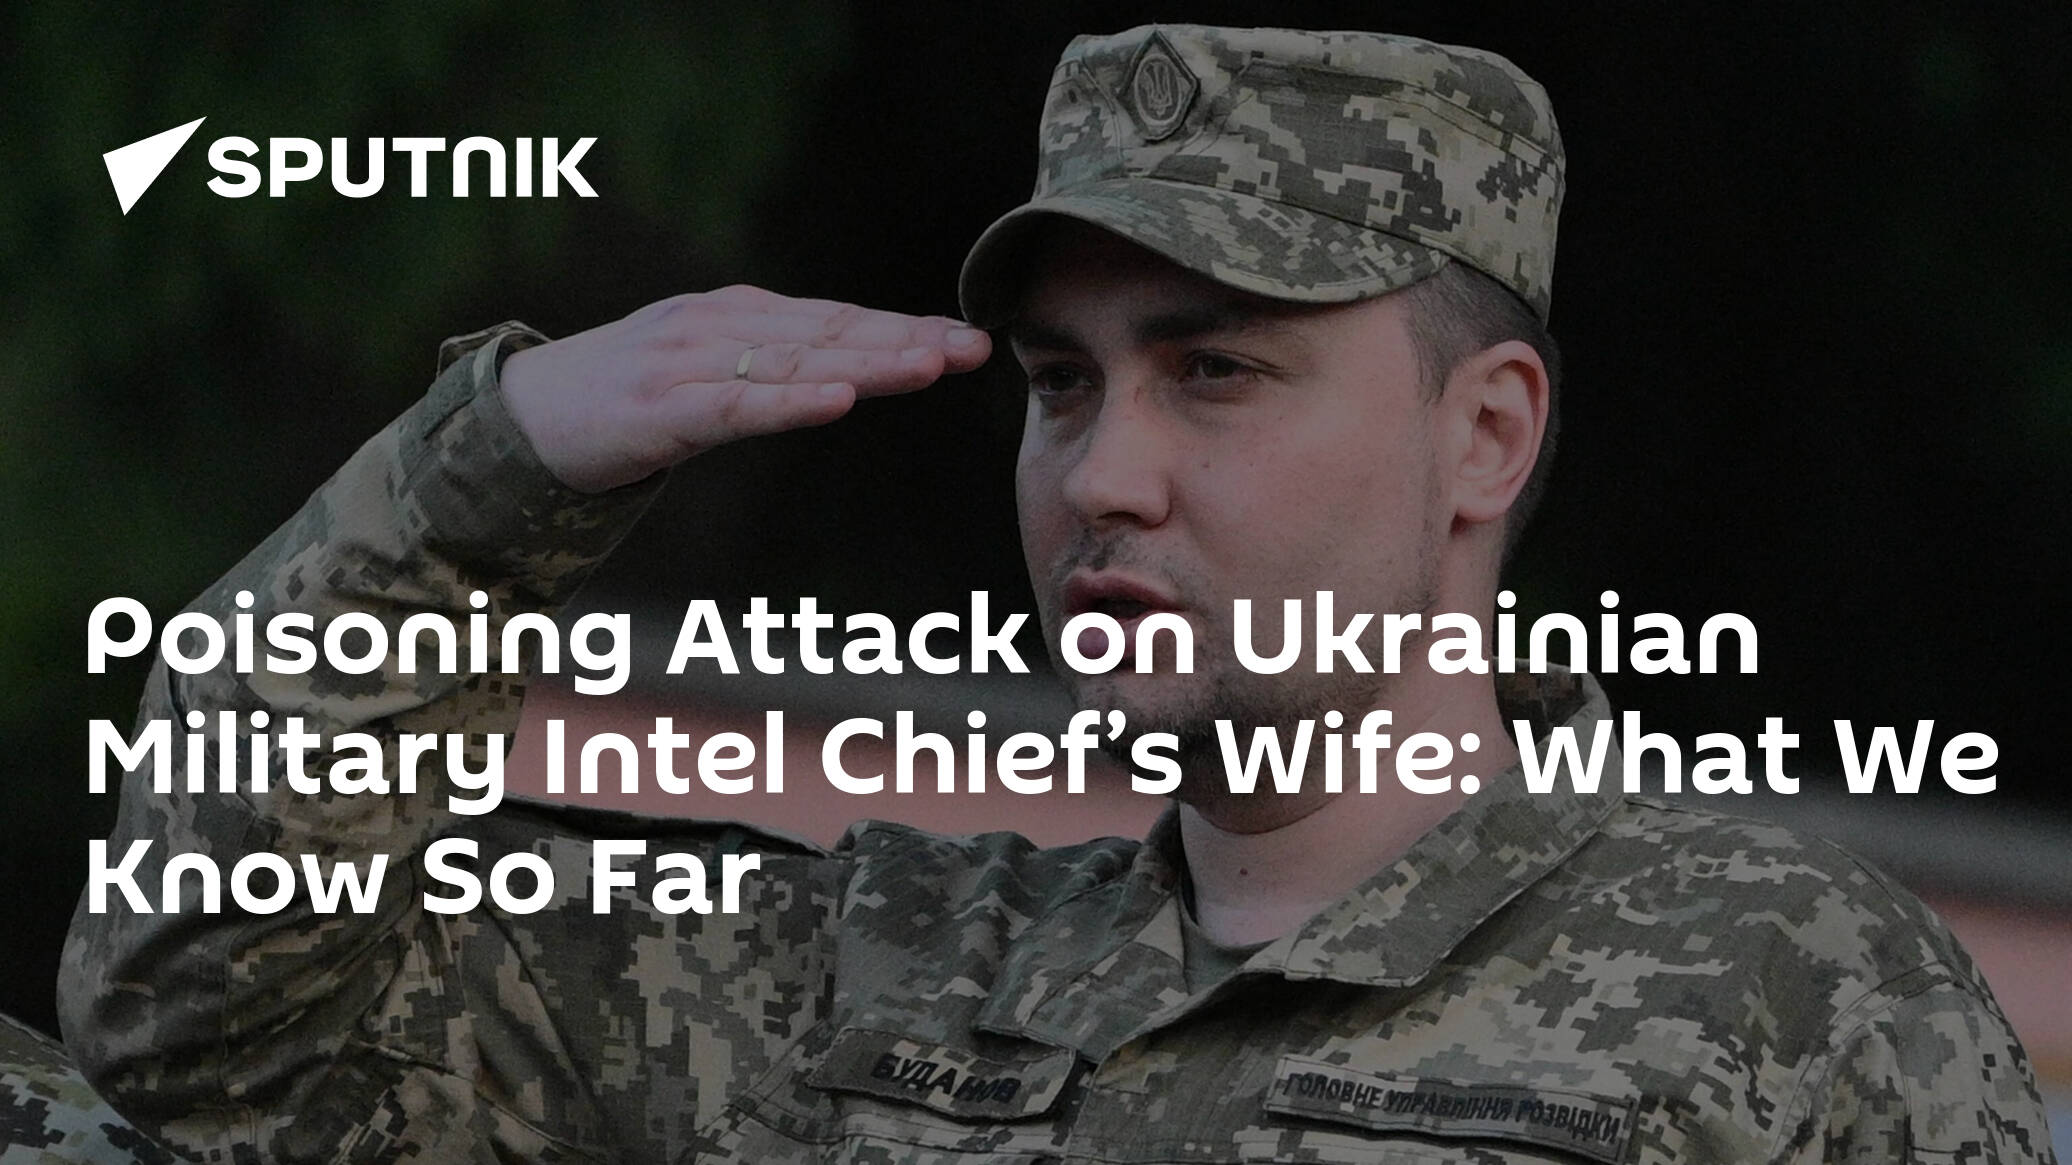 Poisoning Attack on Ukrainian Military Intel Chief’s Wife: What We Know So Far